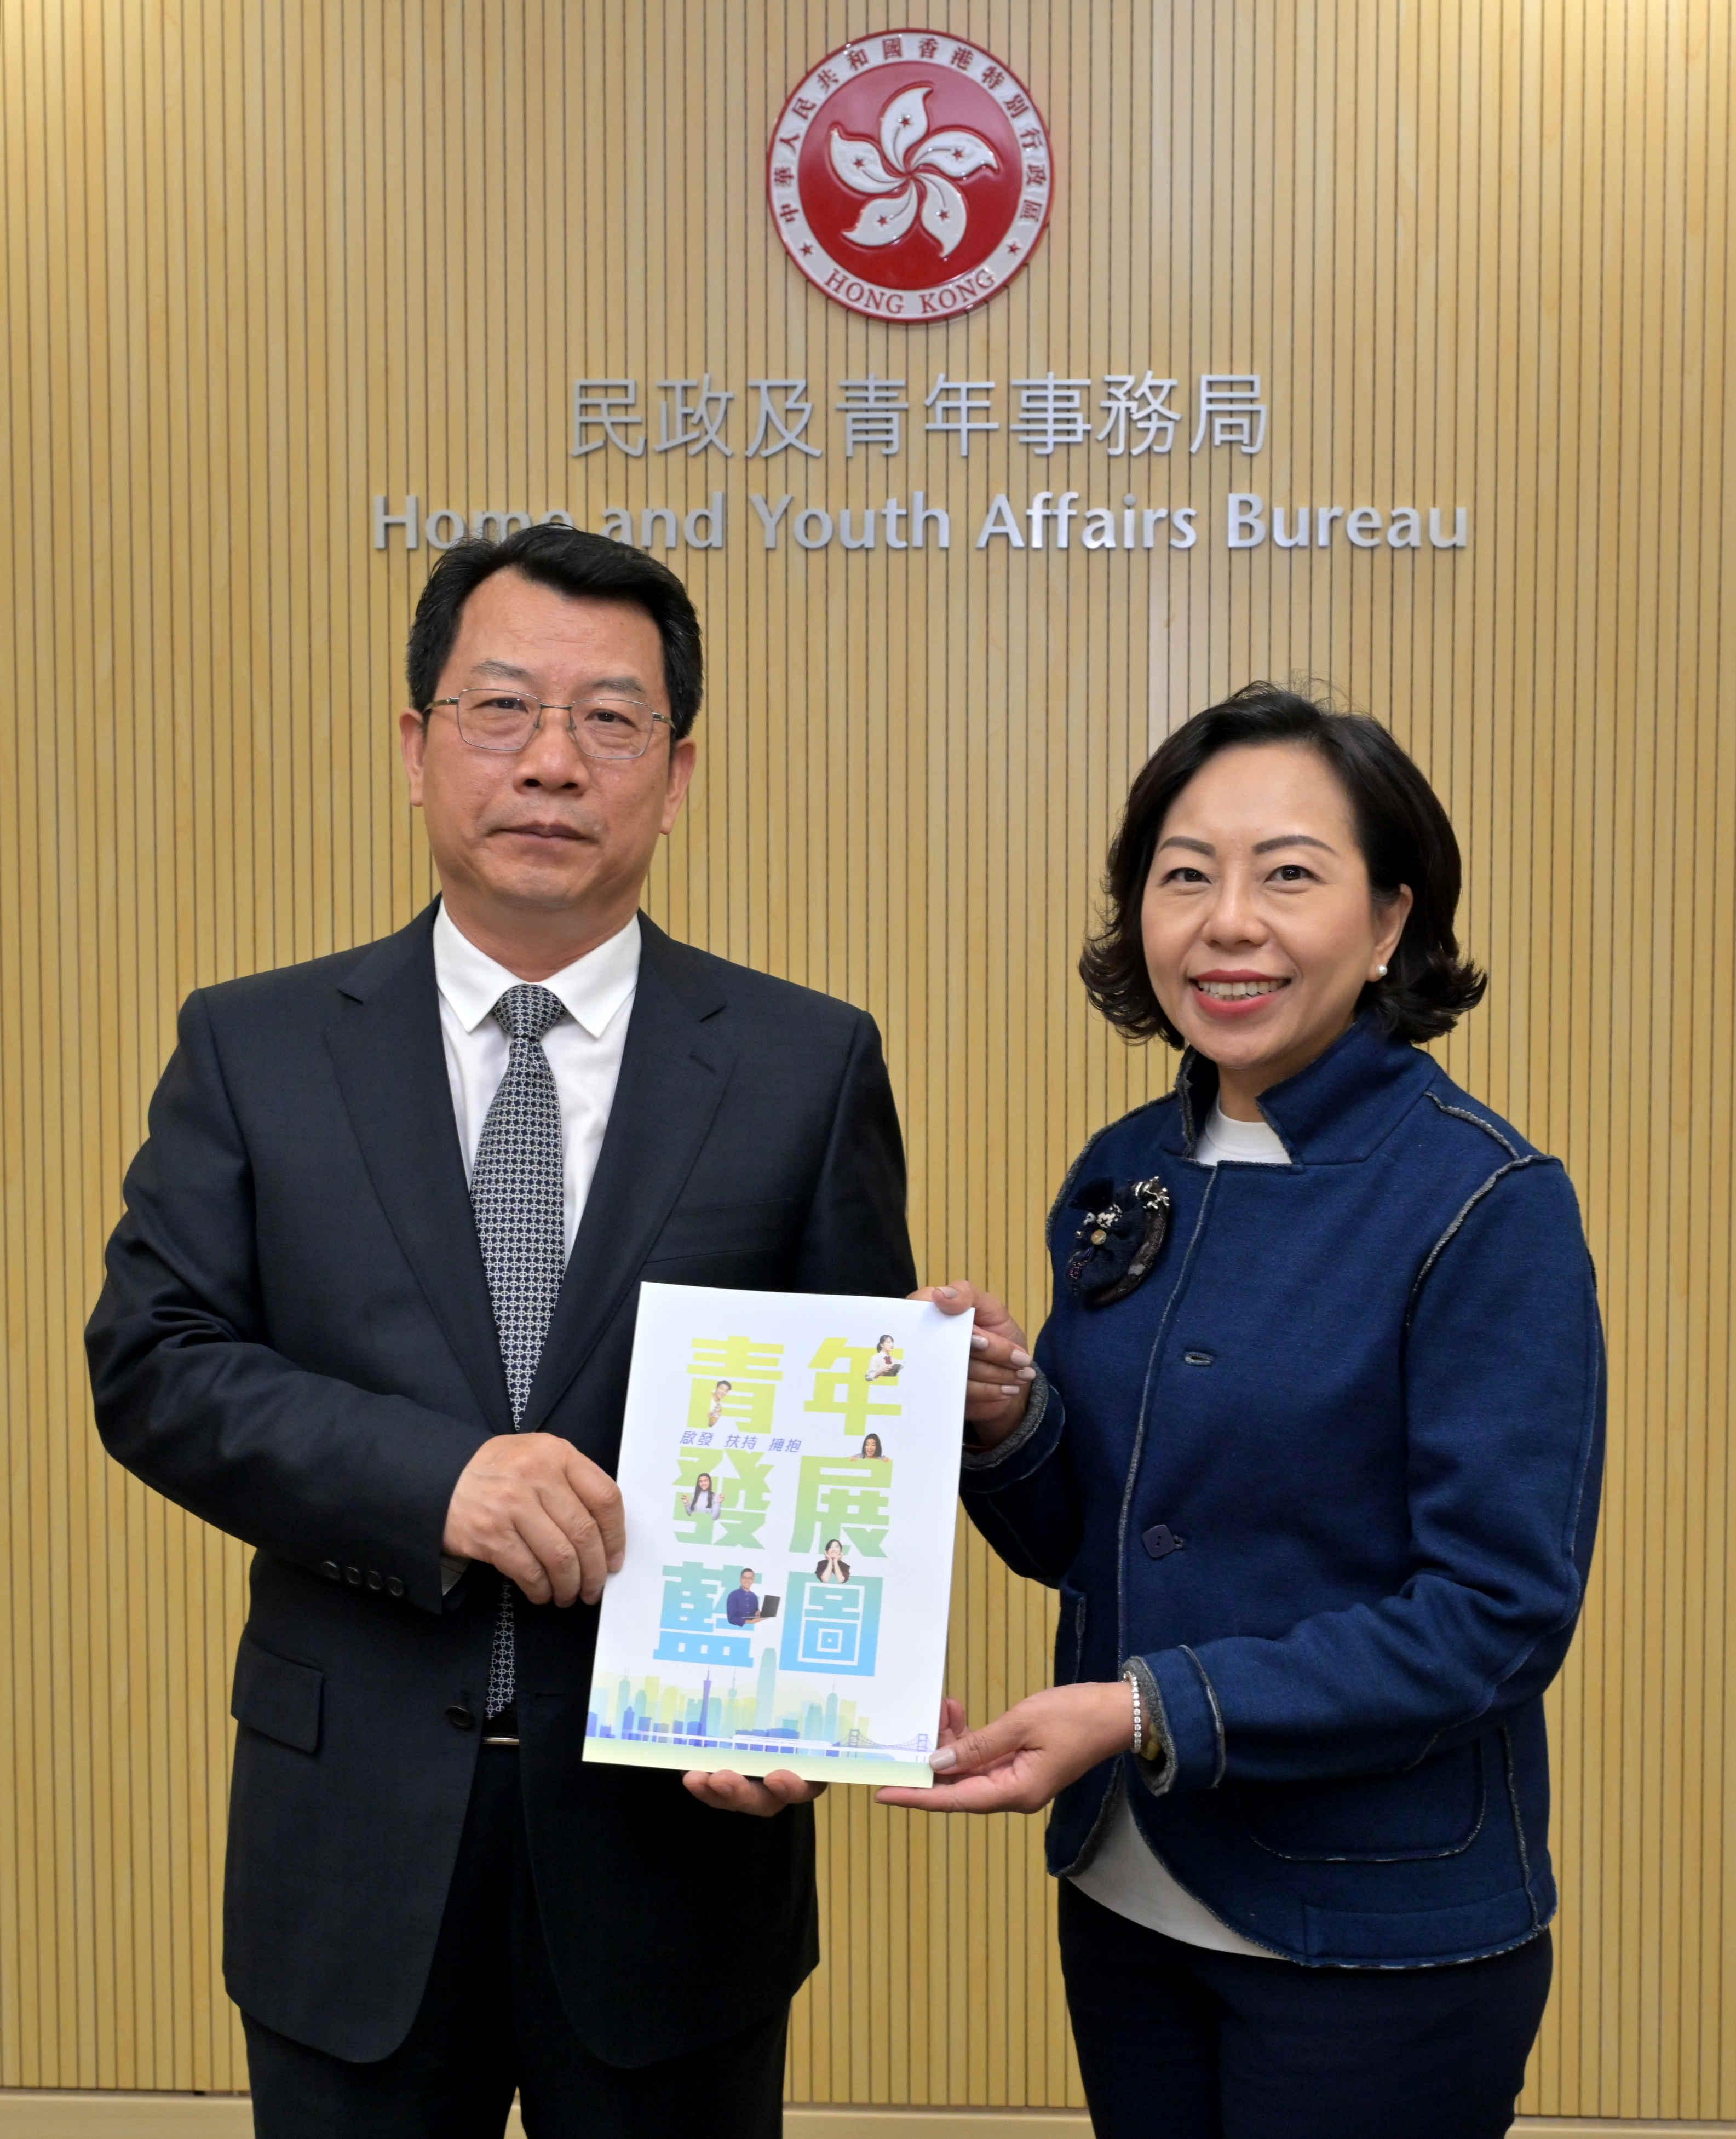 The Secretary for Home and Youth Affairs, Miss Alice Mak (right), today (May 11) met with a Tianjin delegation led by member of the Standing Committee of the Tianjin Municipal Committee of the Communist Party of China and the Head of the United Front Work Department of the Tianjin Municipal Committee of the Communist Party of China Mr Ji Guoqiang (left) to exchange views on strengthening youth development and exchanges between Tianjin and Hong Kong. 